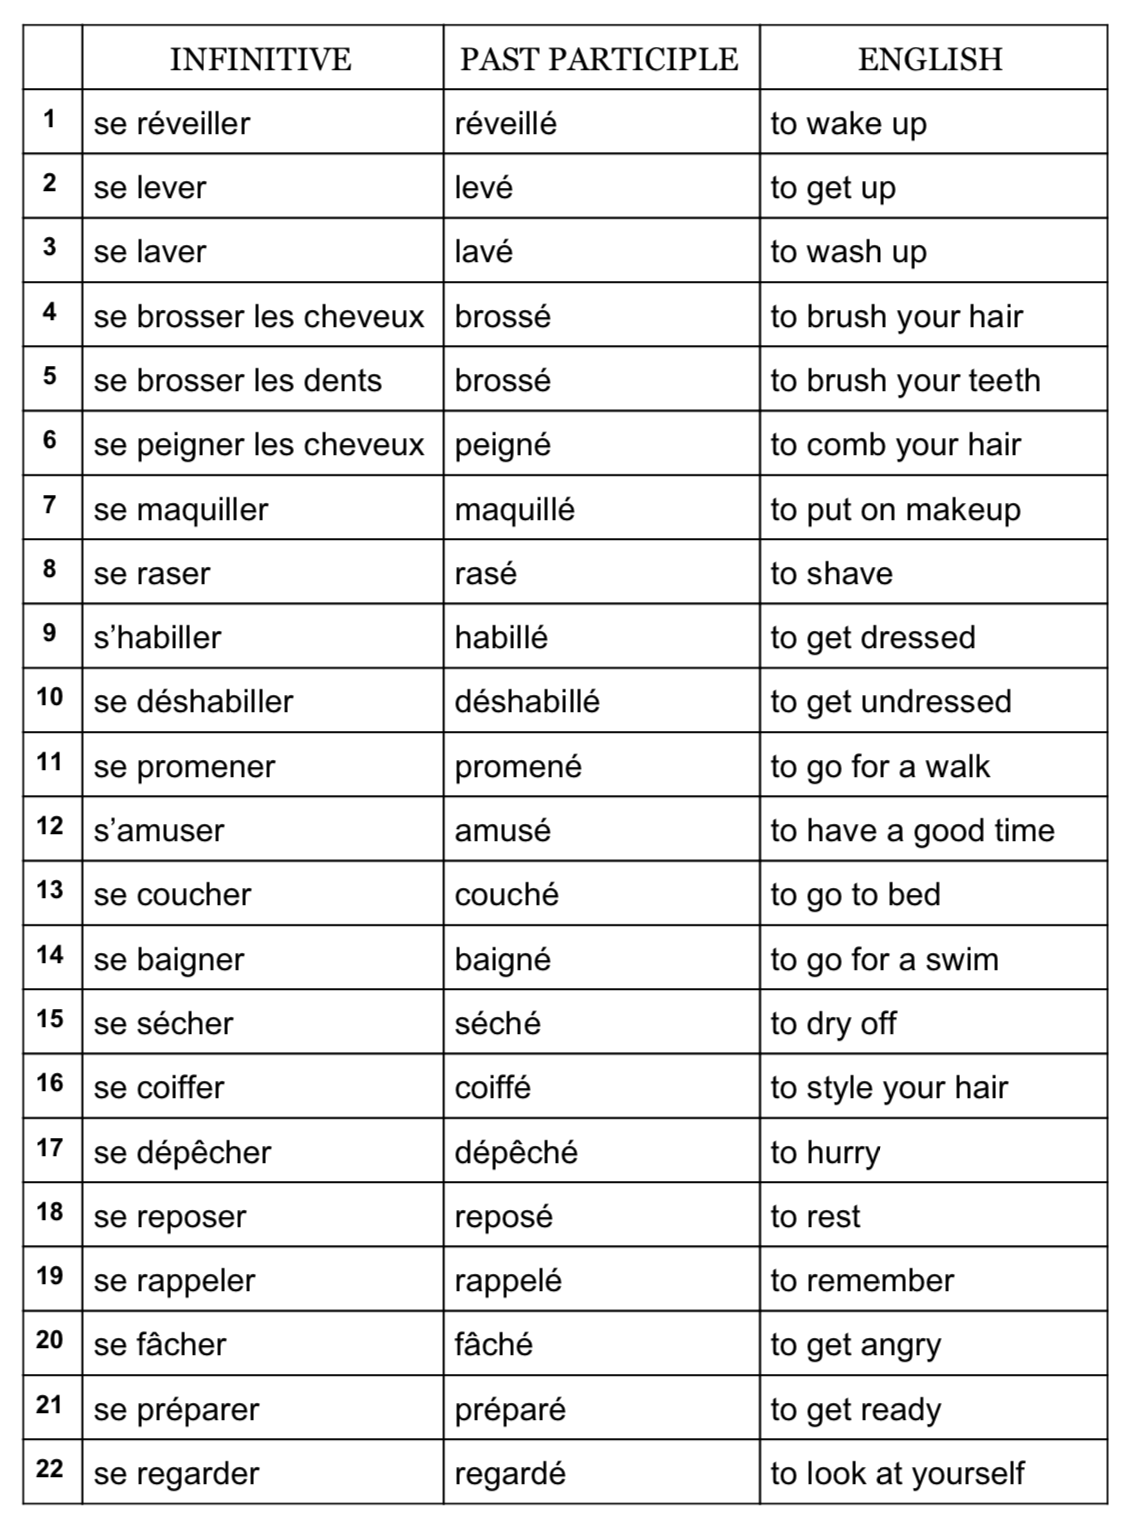 reflexive-verbs-in-french-present-past-tenses-by-anyholland